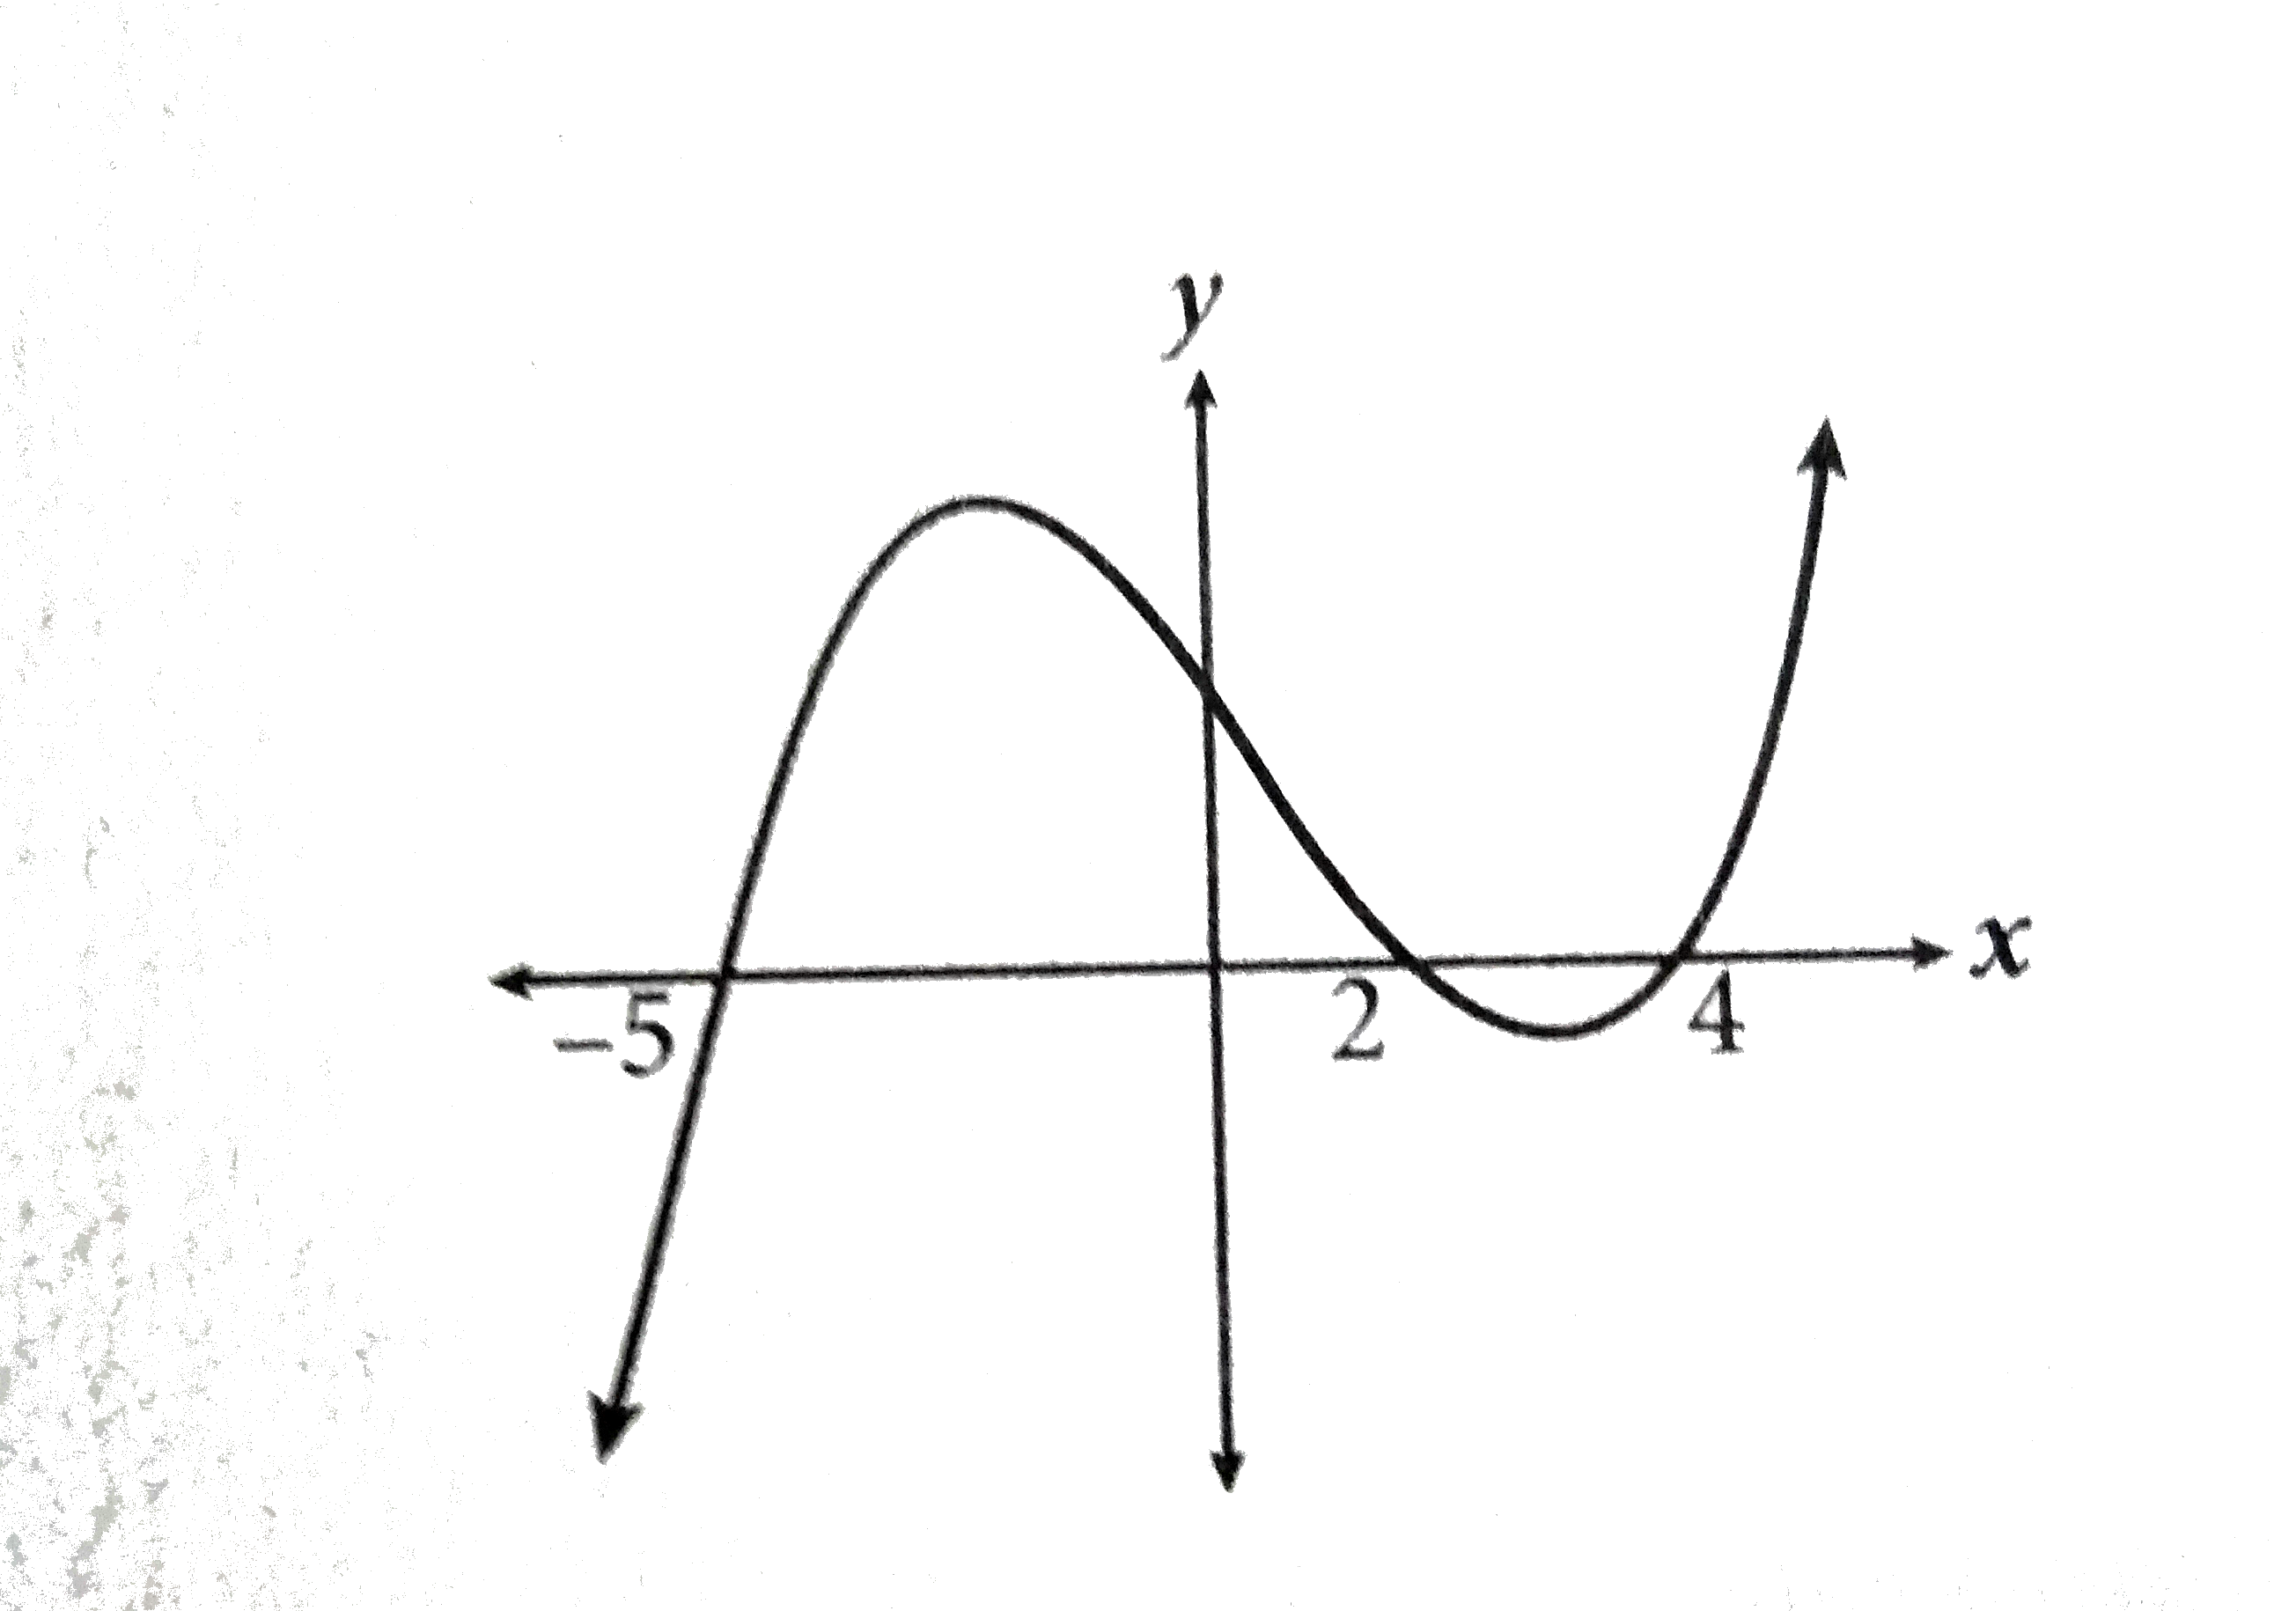 The polynomial function shown in the graph crosses the x-axis at x=-5, x=2 and x=4. If the equation for this polynomial is written in the form y=ax^(3)+bx^(2)+cx+d, with a=1, which of the following could be the equation?